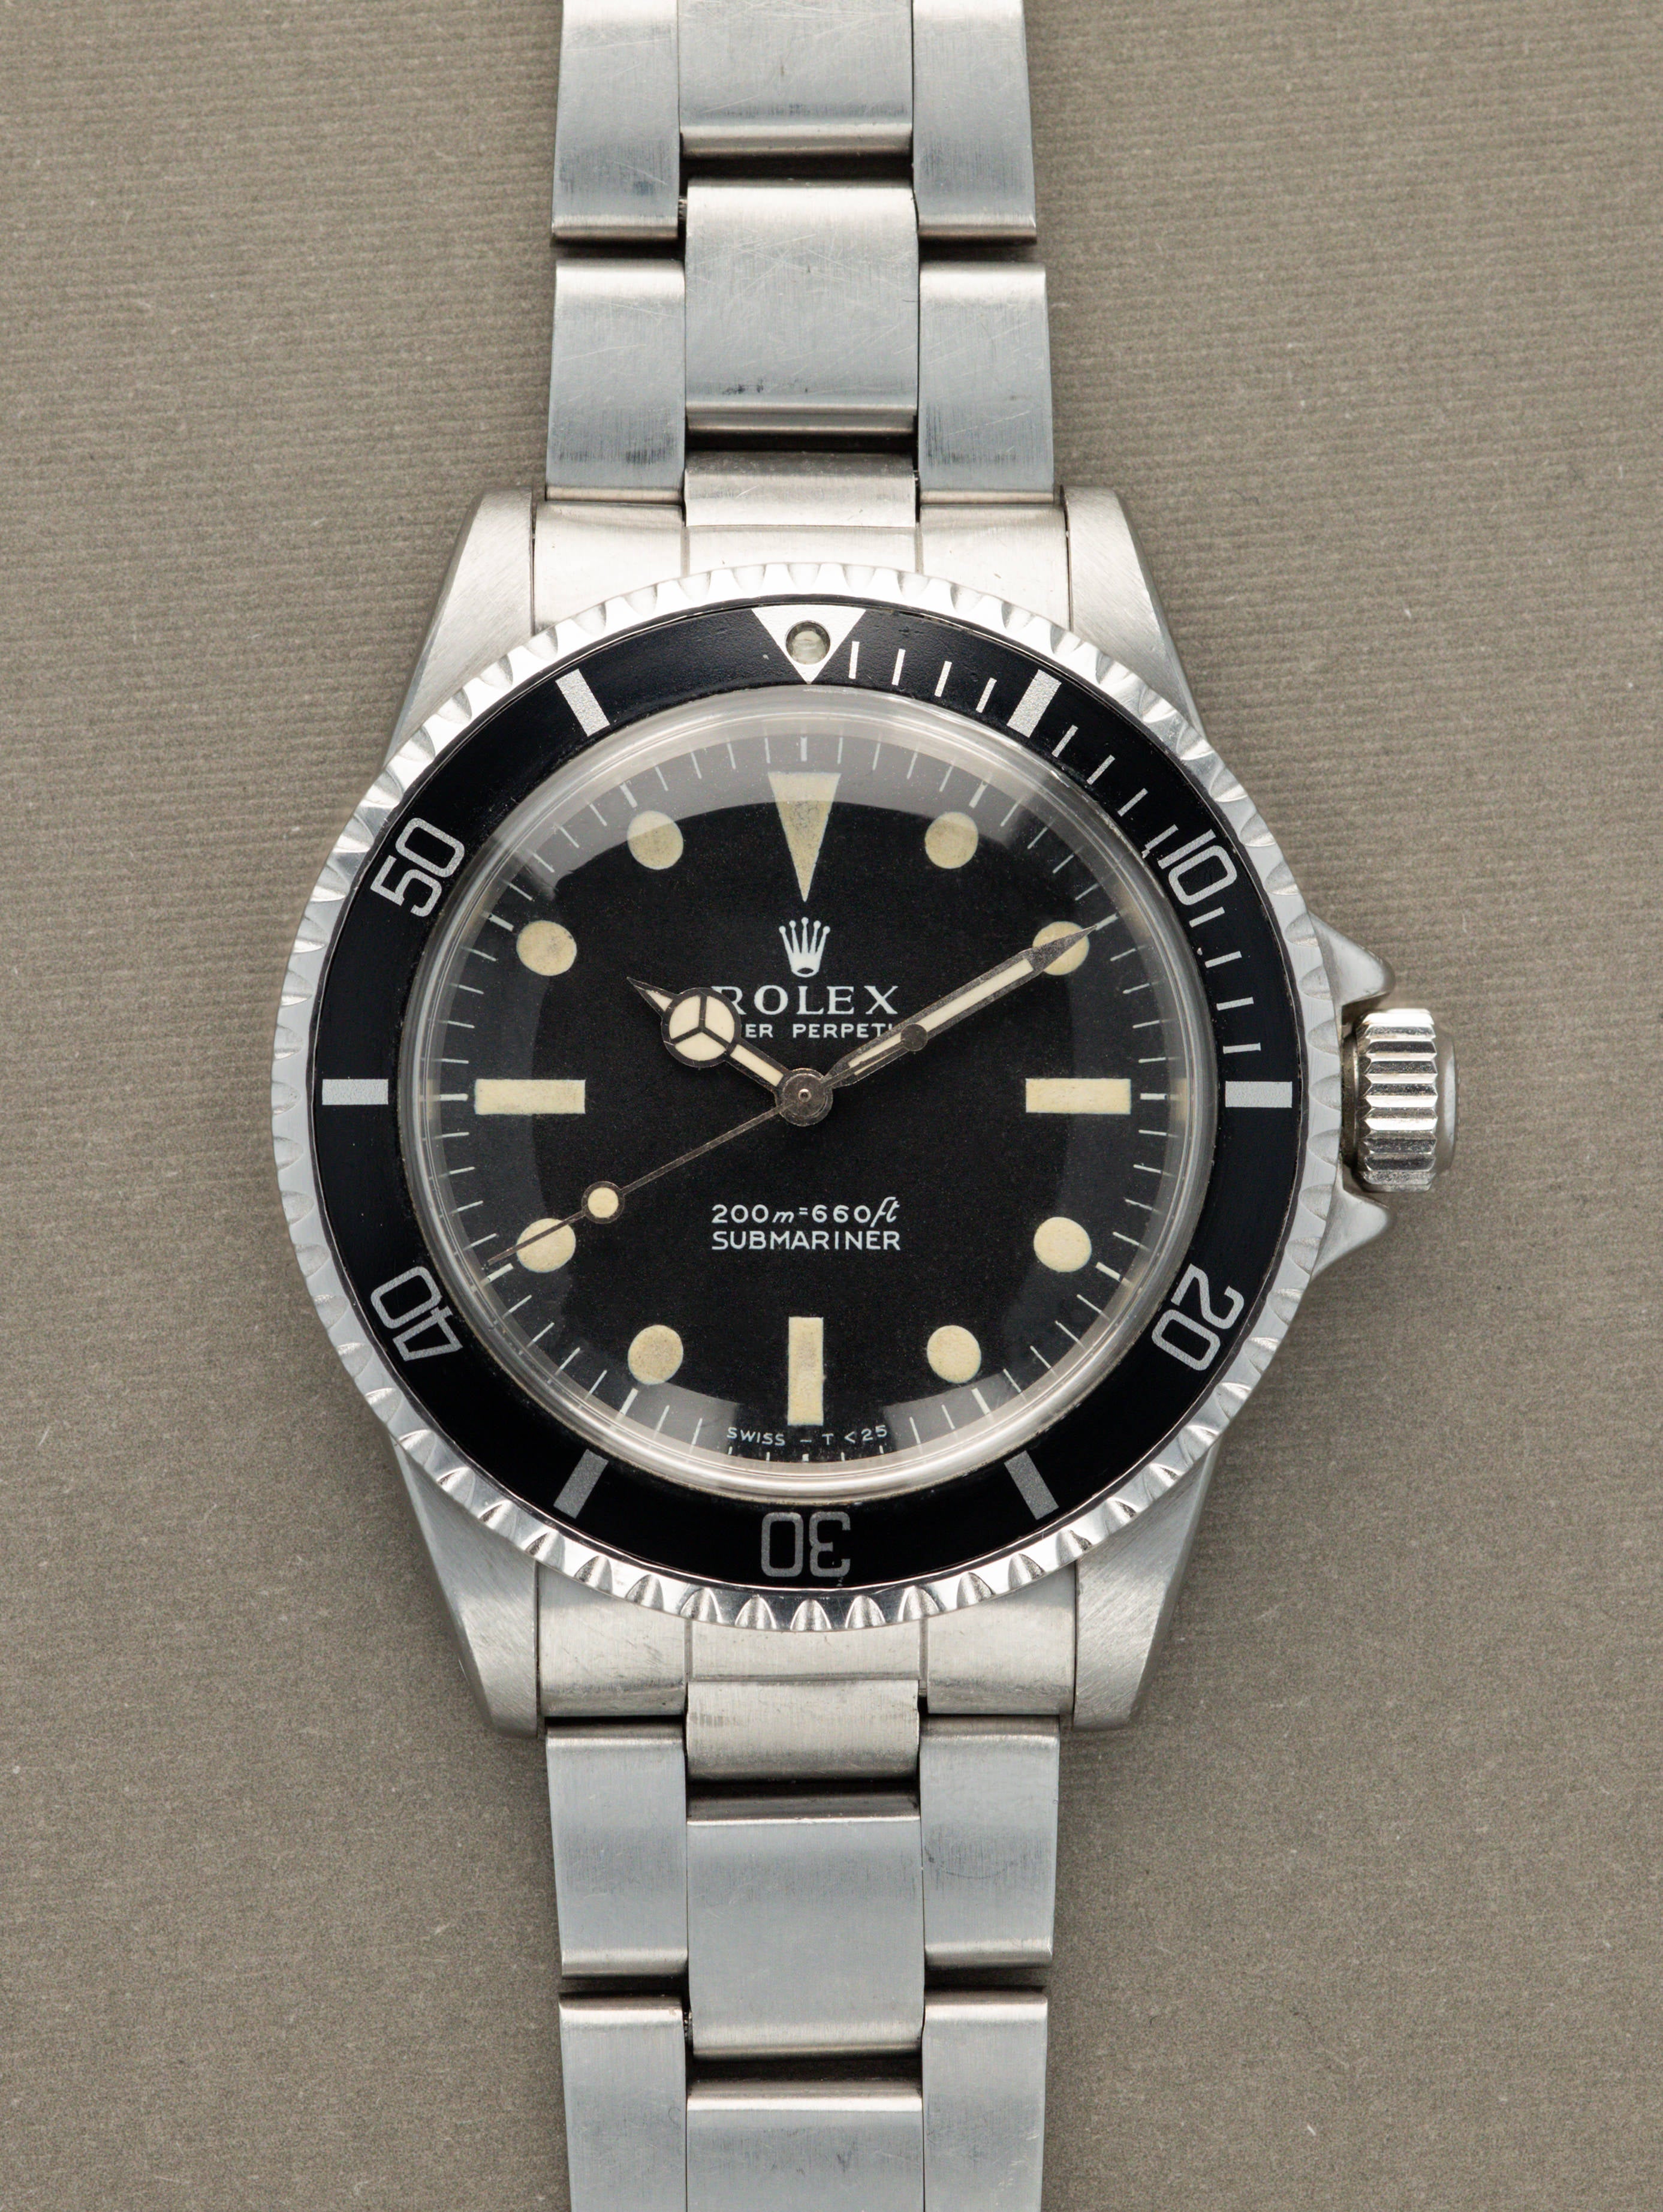 Rolex Submariner Ref. 5513 - 'Meters First' Dial